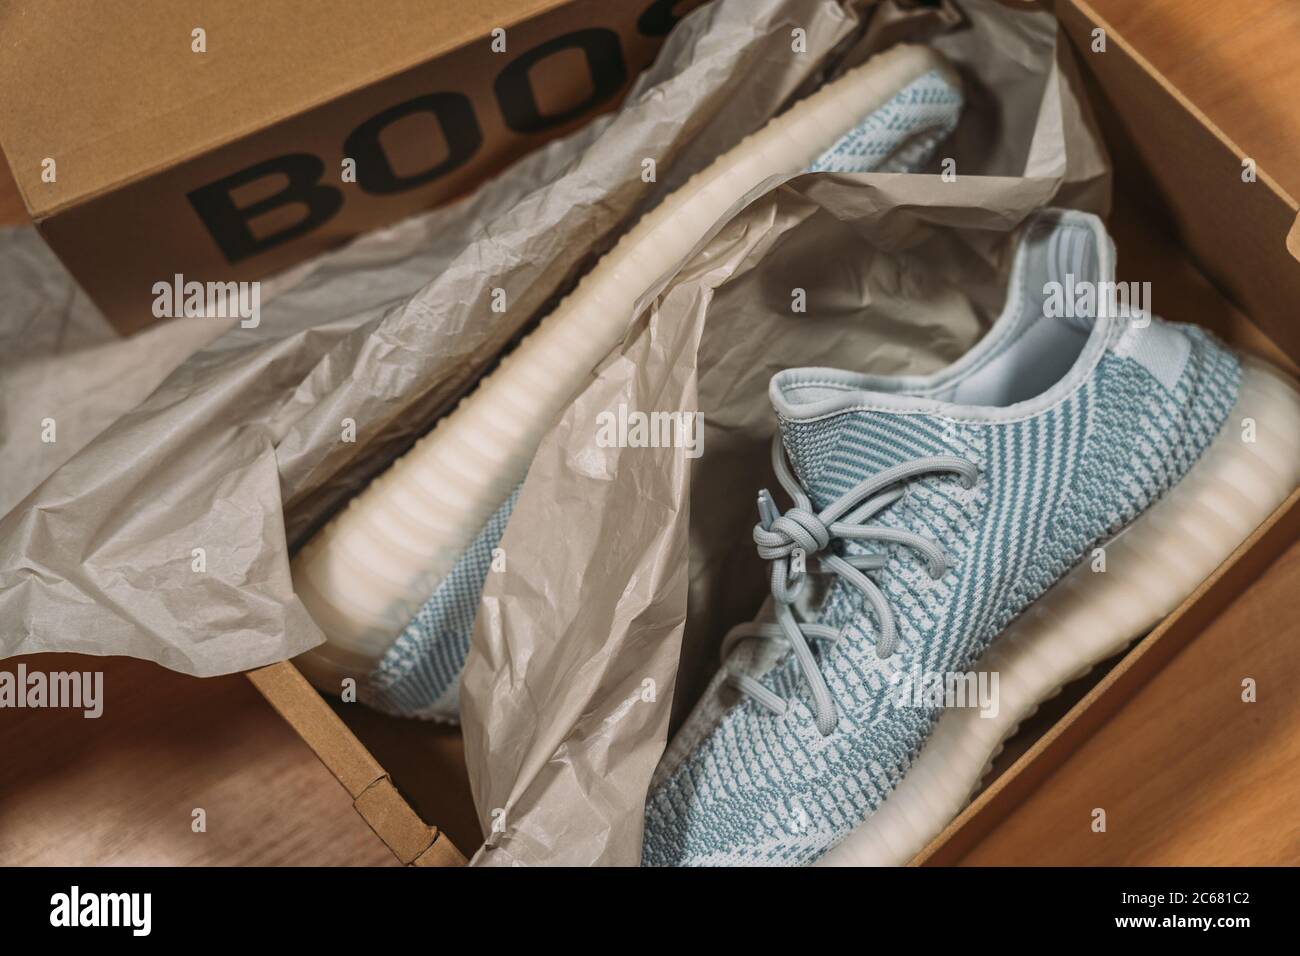 Moscou, Russie - juin 2020 : Adidas Yeezy Boost 350 V2 - Famous Limited Collection Fashion Sneakers par Kanye West et Adidas collaboration. Banque D'Images